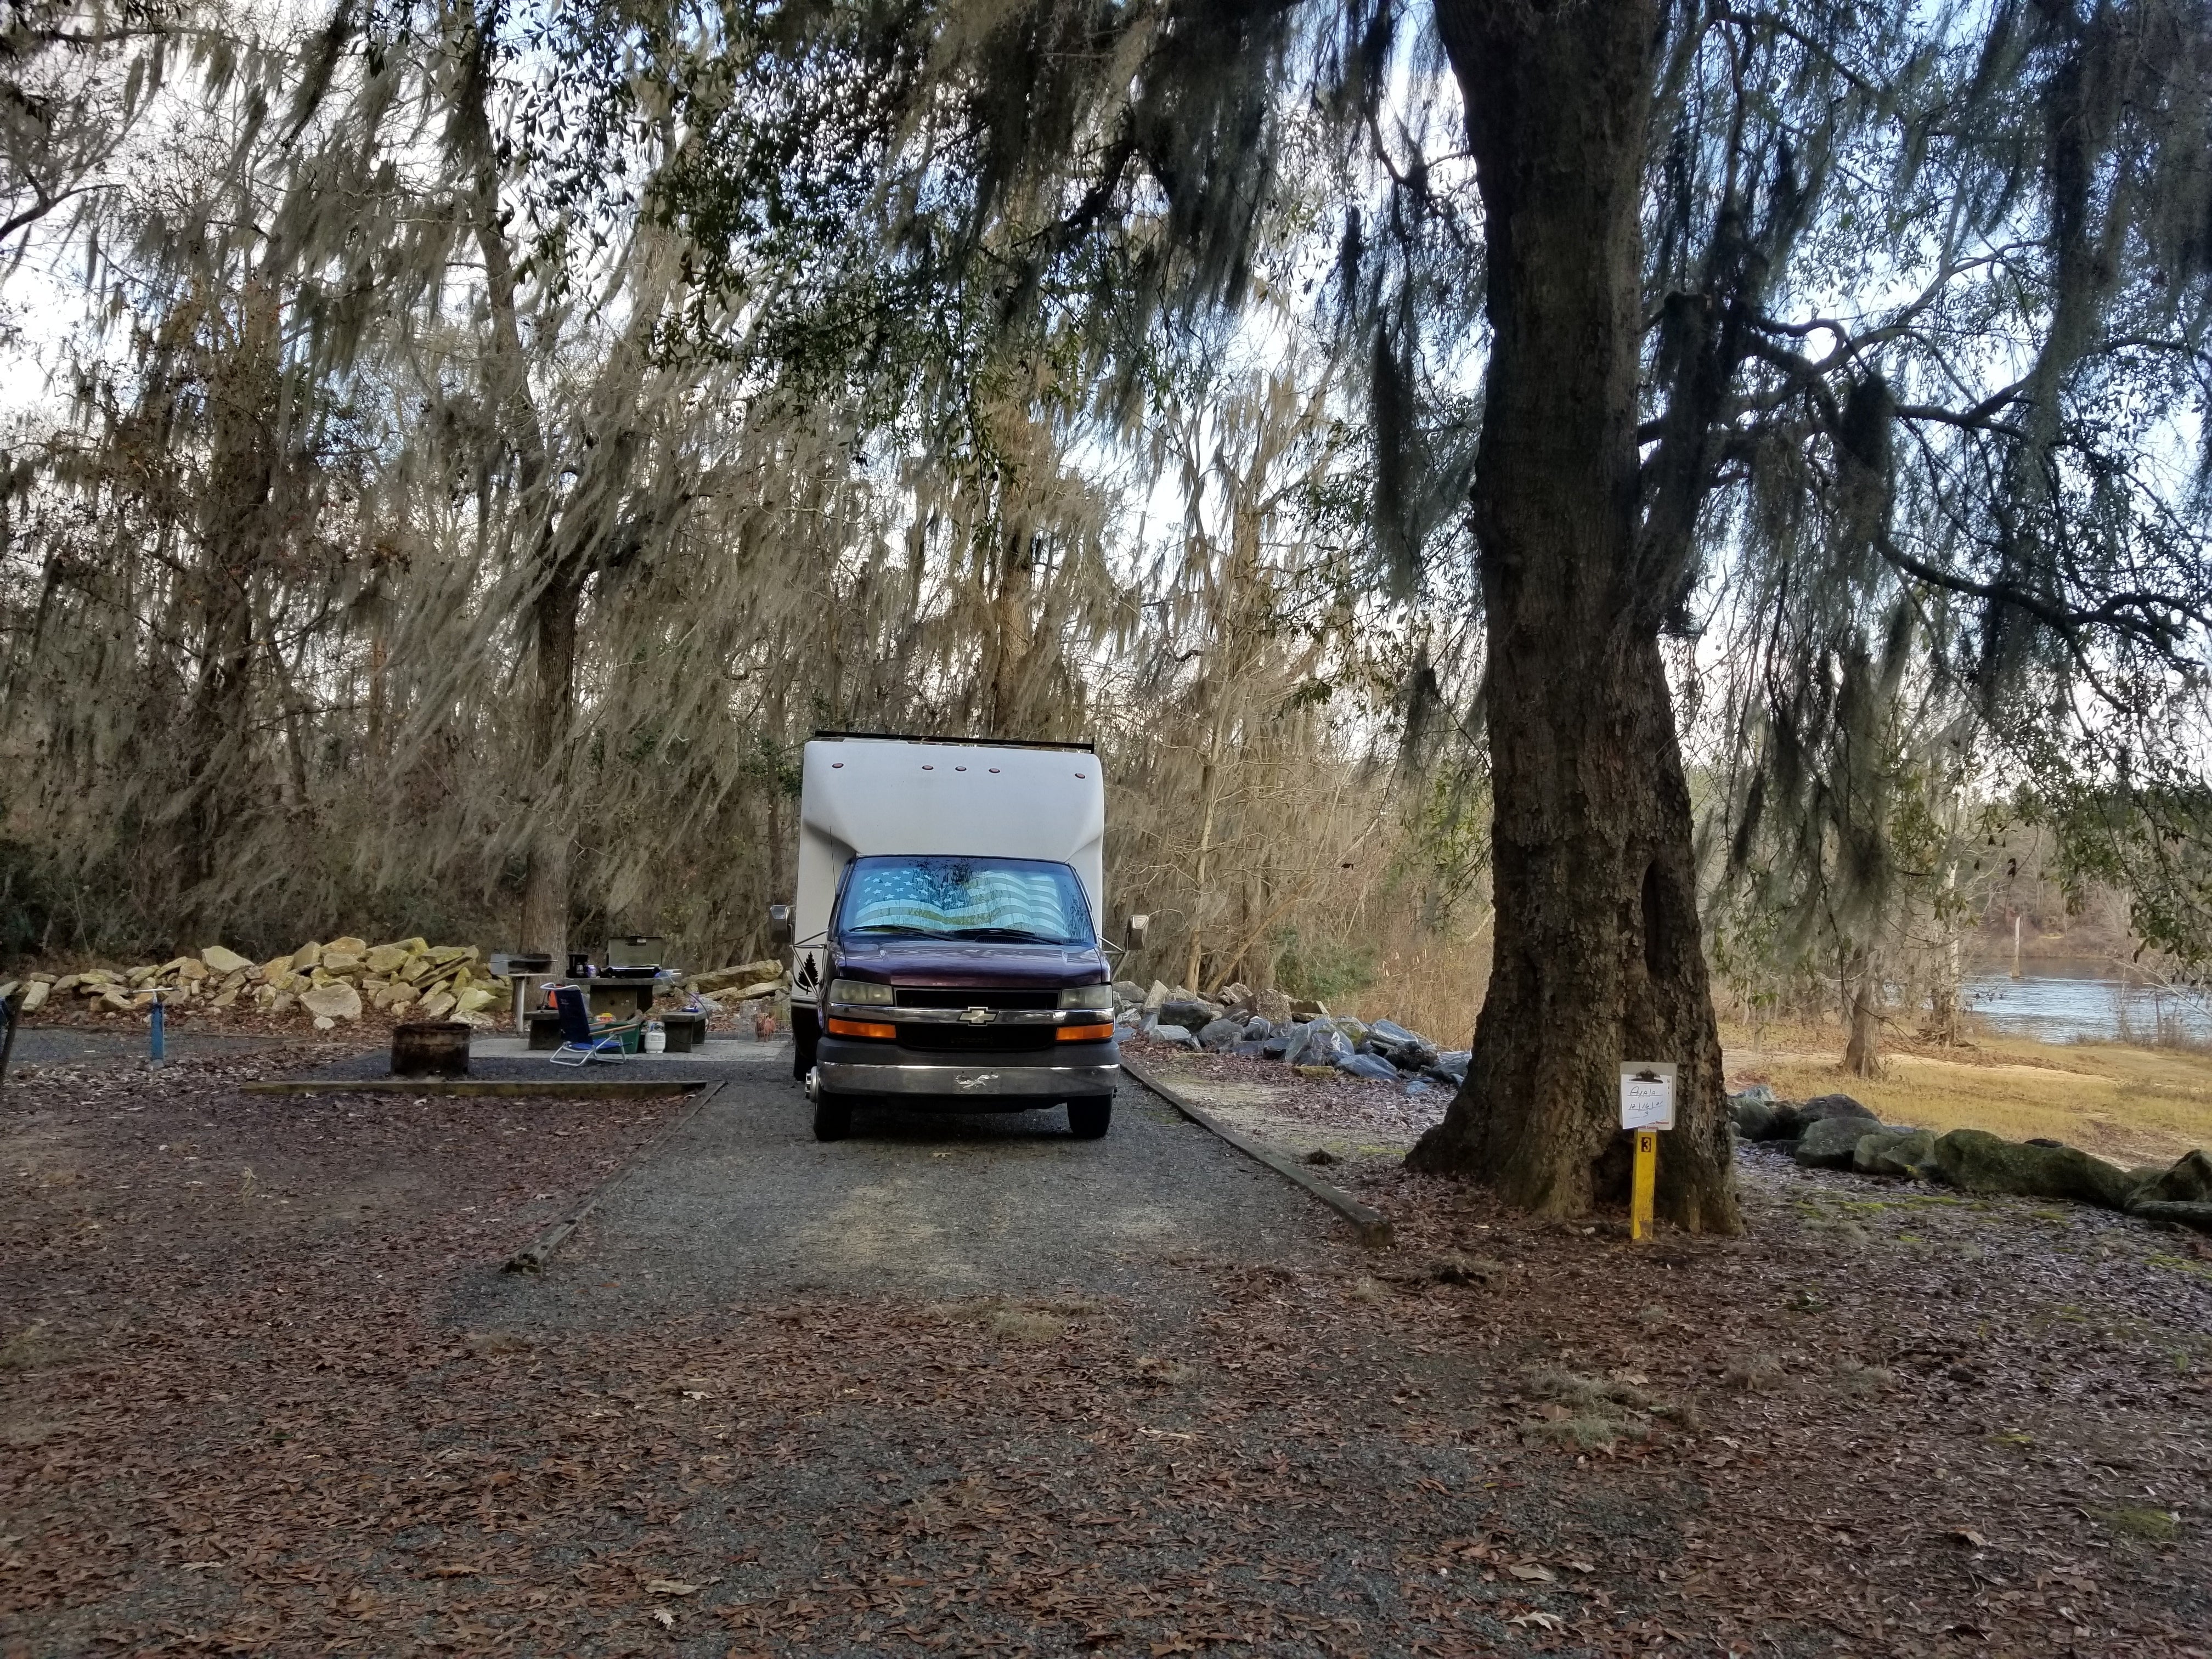 Camper submitted image from Killebrew Park - 4